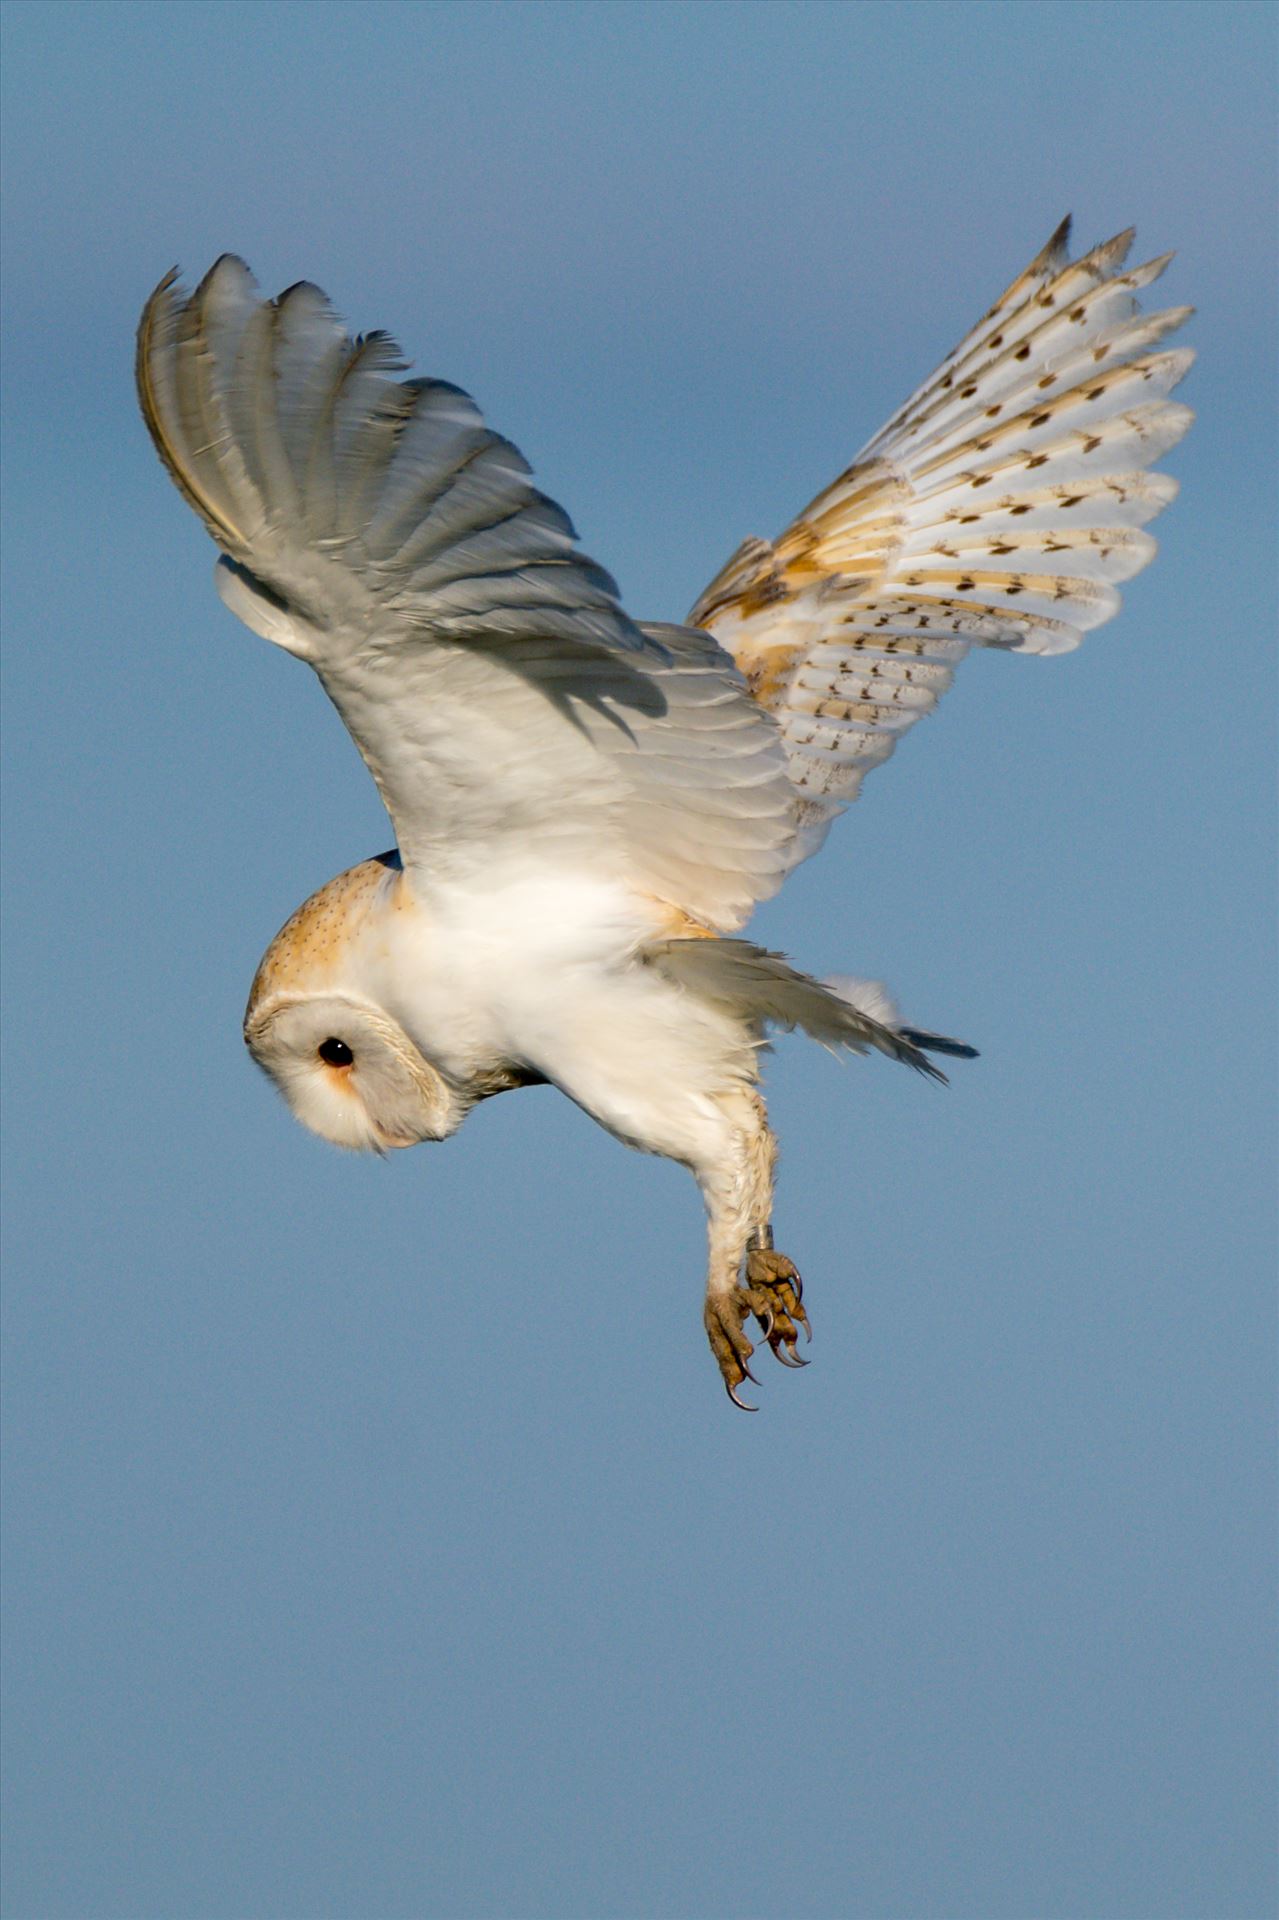 Barn Owl on the hunt 02 - A Barn Owl on the hunt for its breakfast by AJ Stoves Photography